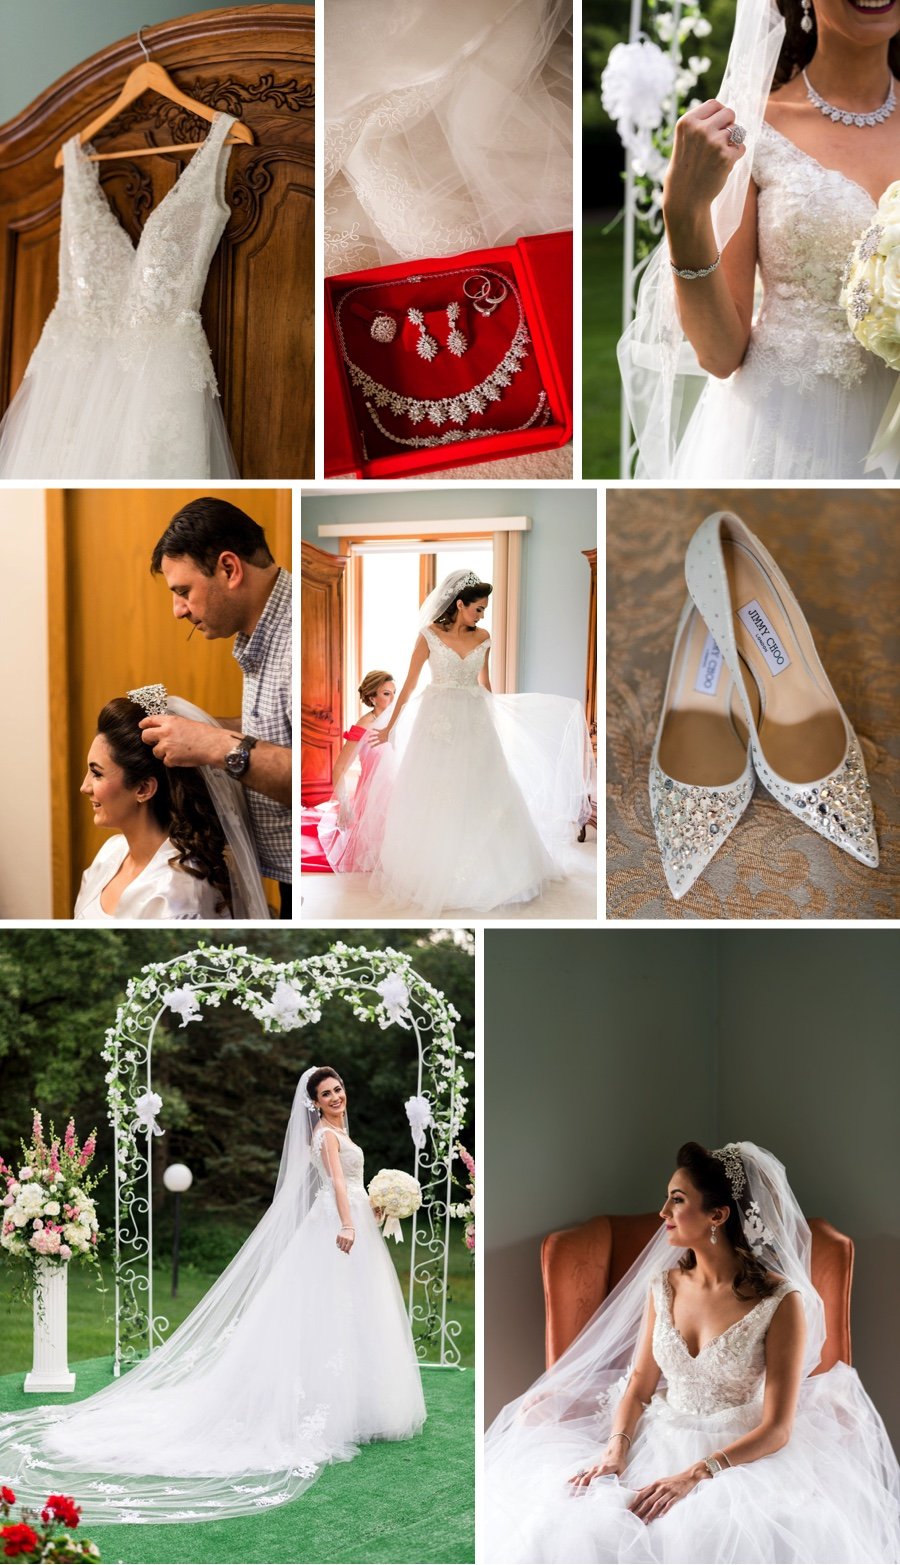 Real wedding: A perfect Persian day